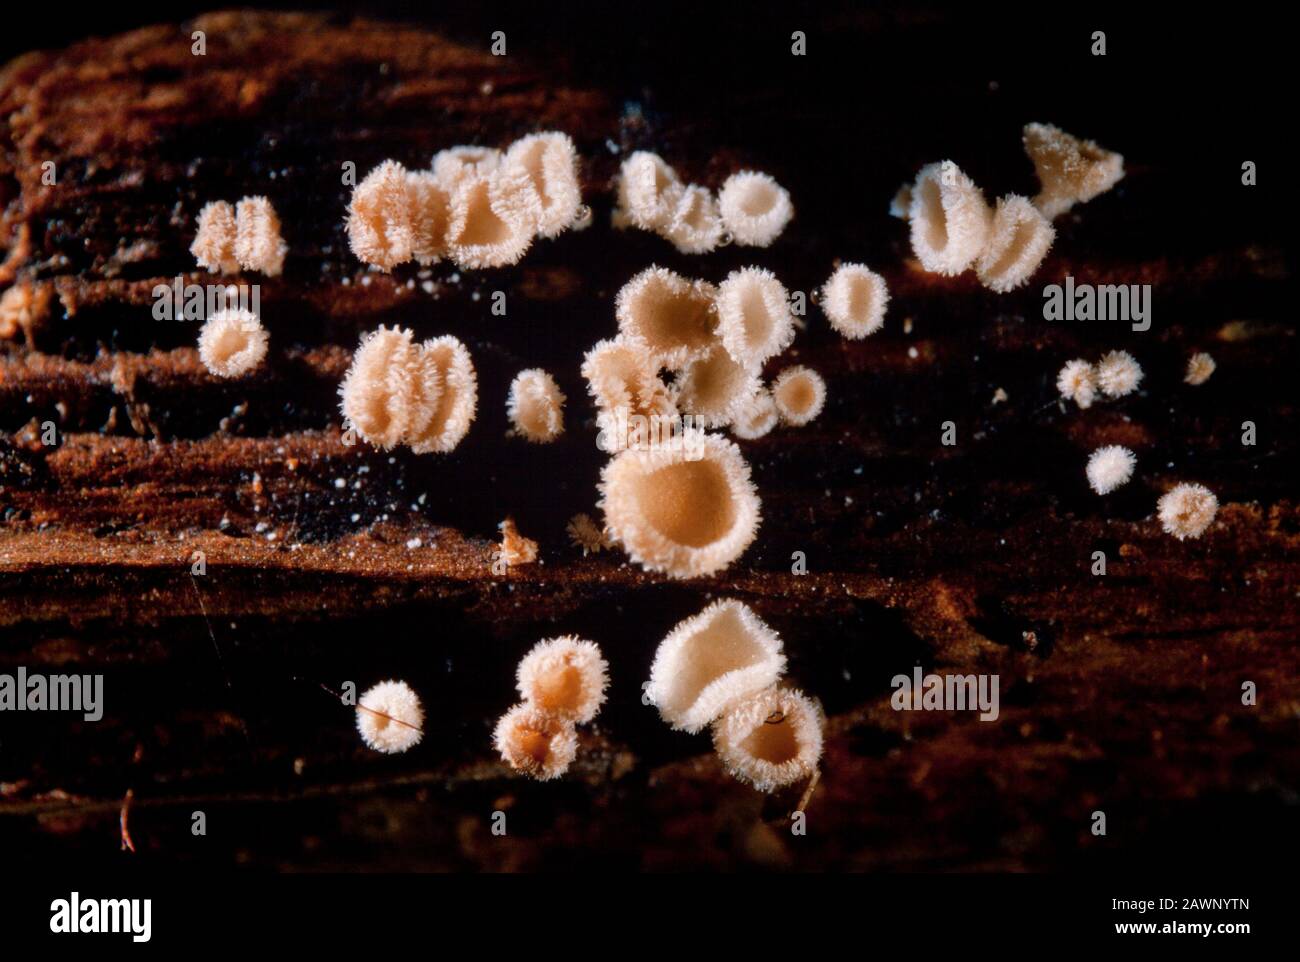 A tiny cup fungus growing on decaying wood, approx 5mm diameter, Autumn, UK Stock Photo